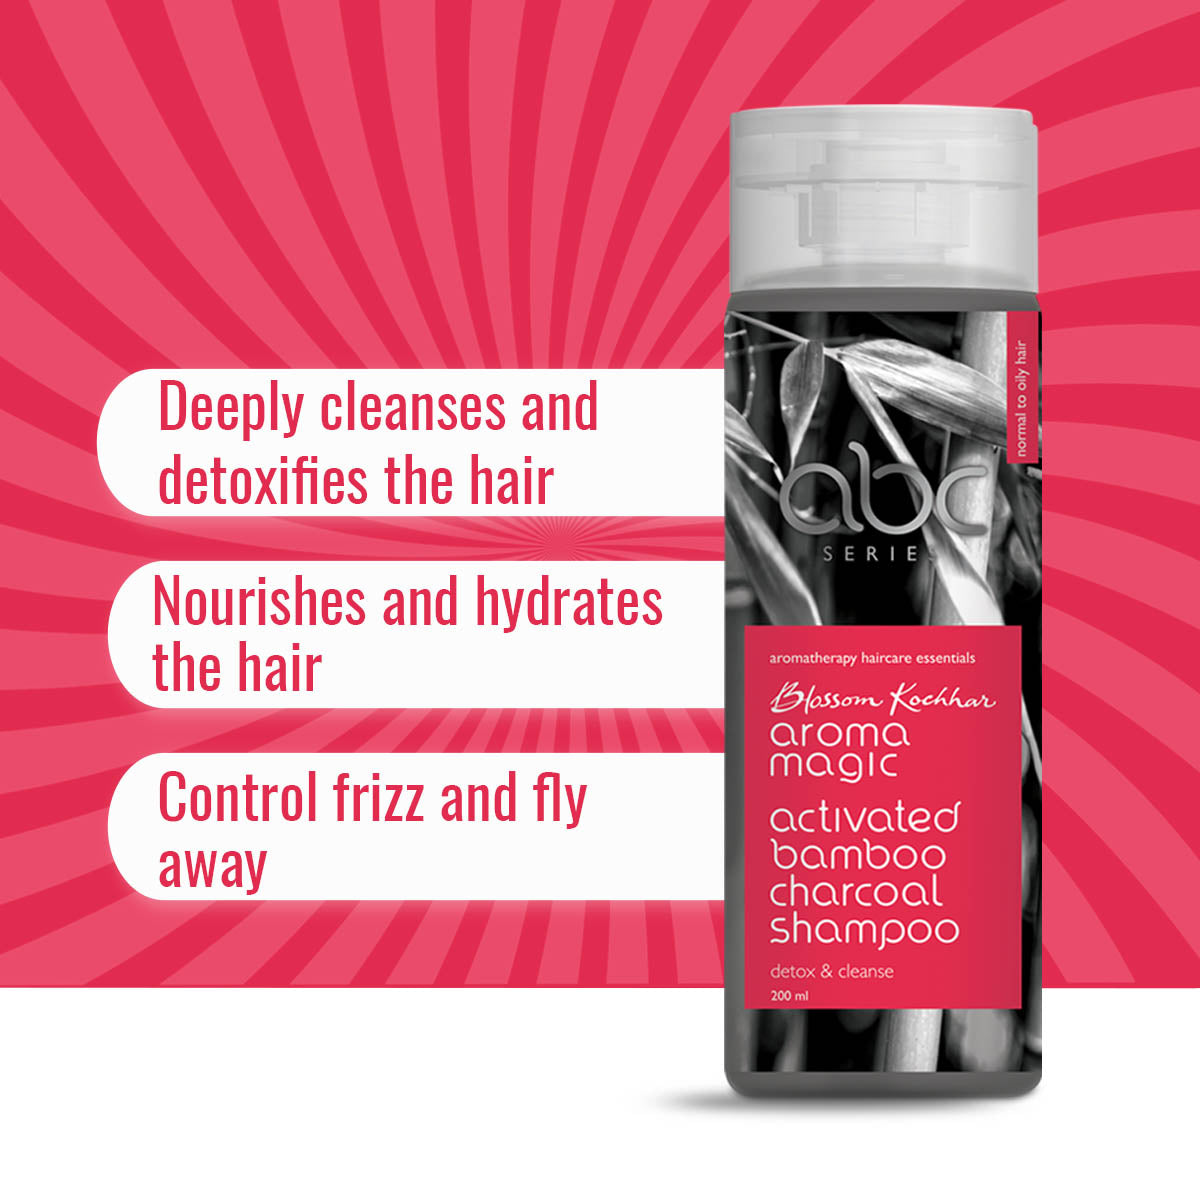 Activated Bamboo Charcoal Shampoo (1009458348075)